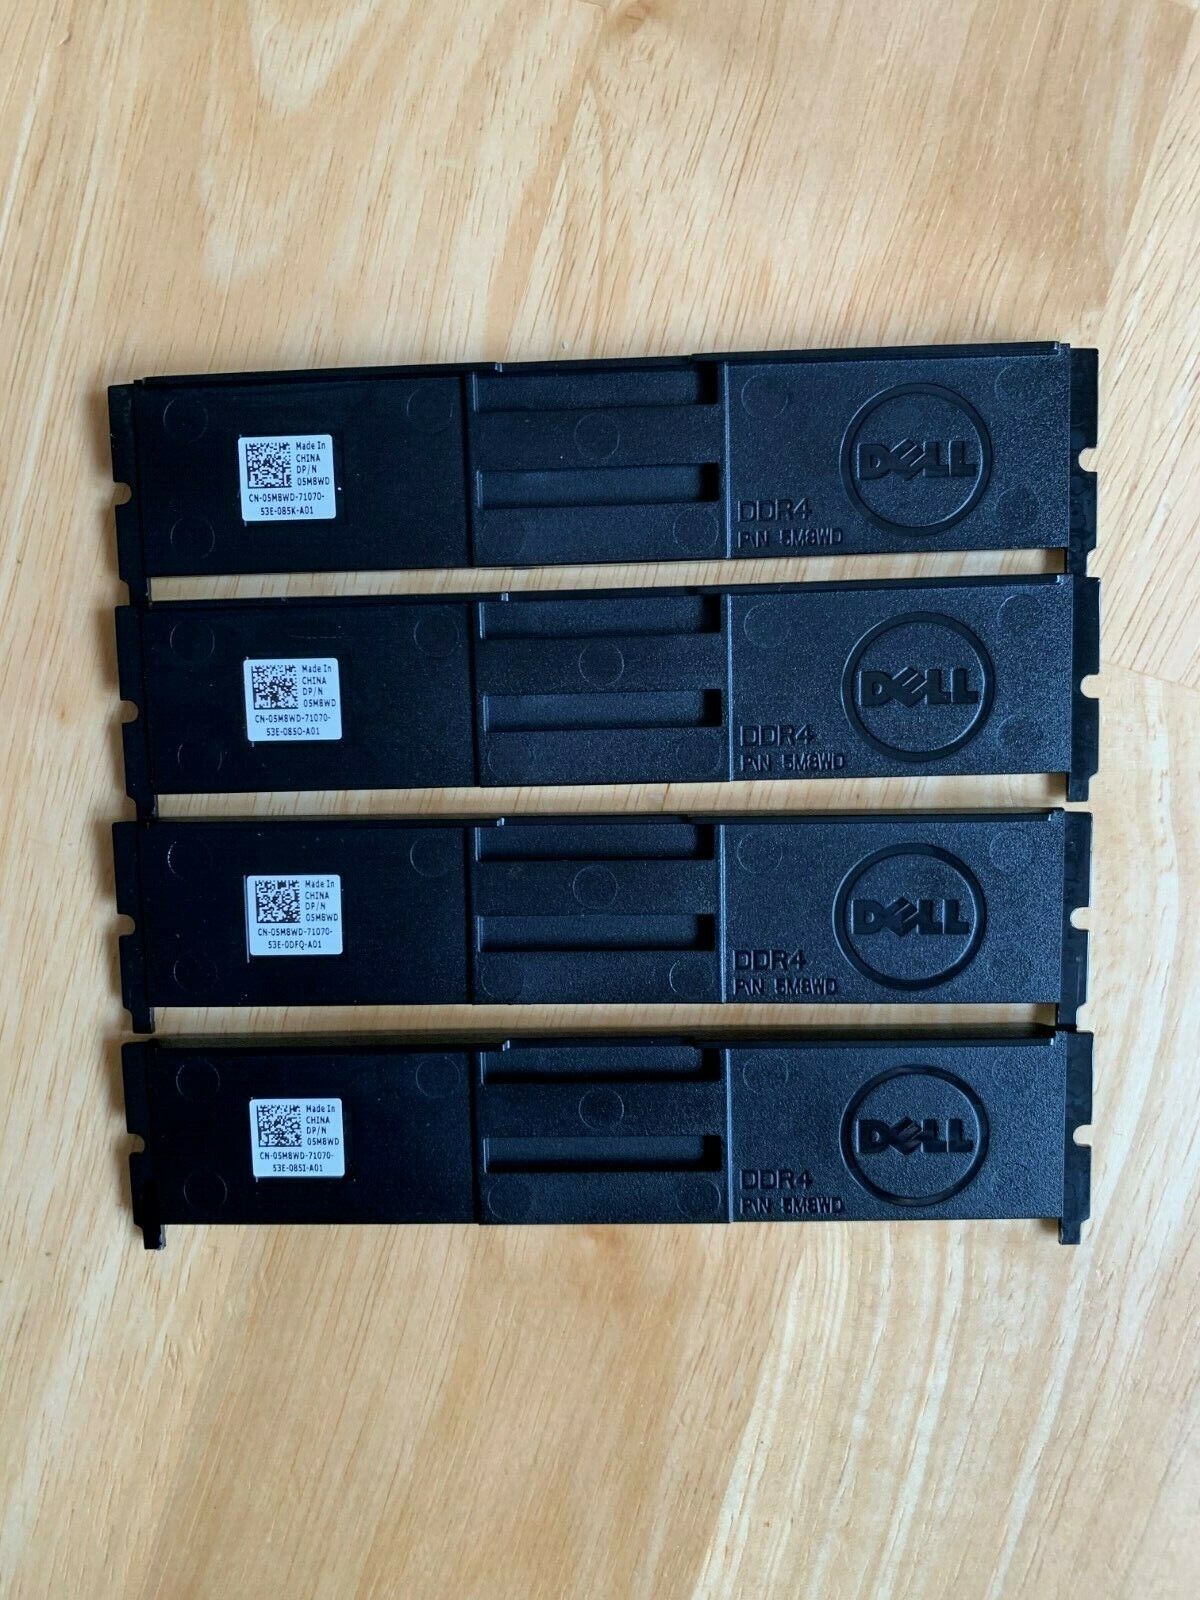 Lot of 4 Dell PowerEdge Server DDR4 Memory RAM Blank Filler 5M8WD 05M8WD